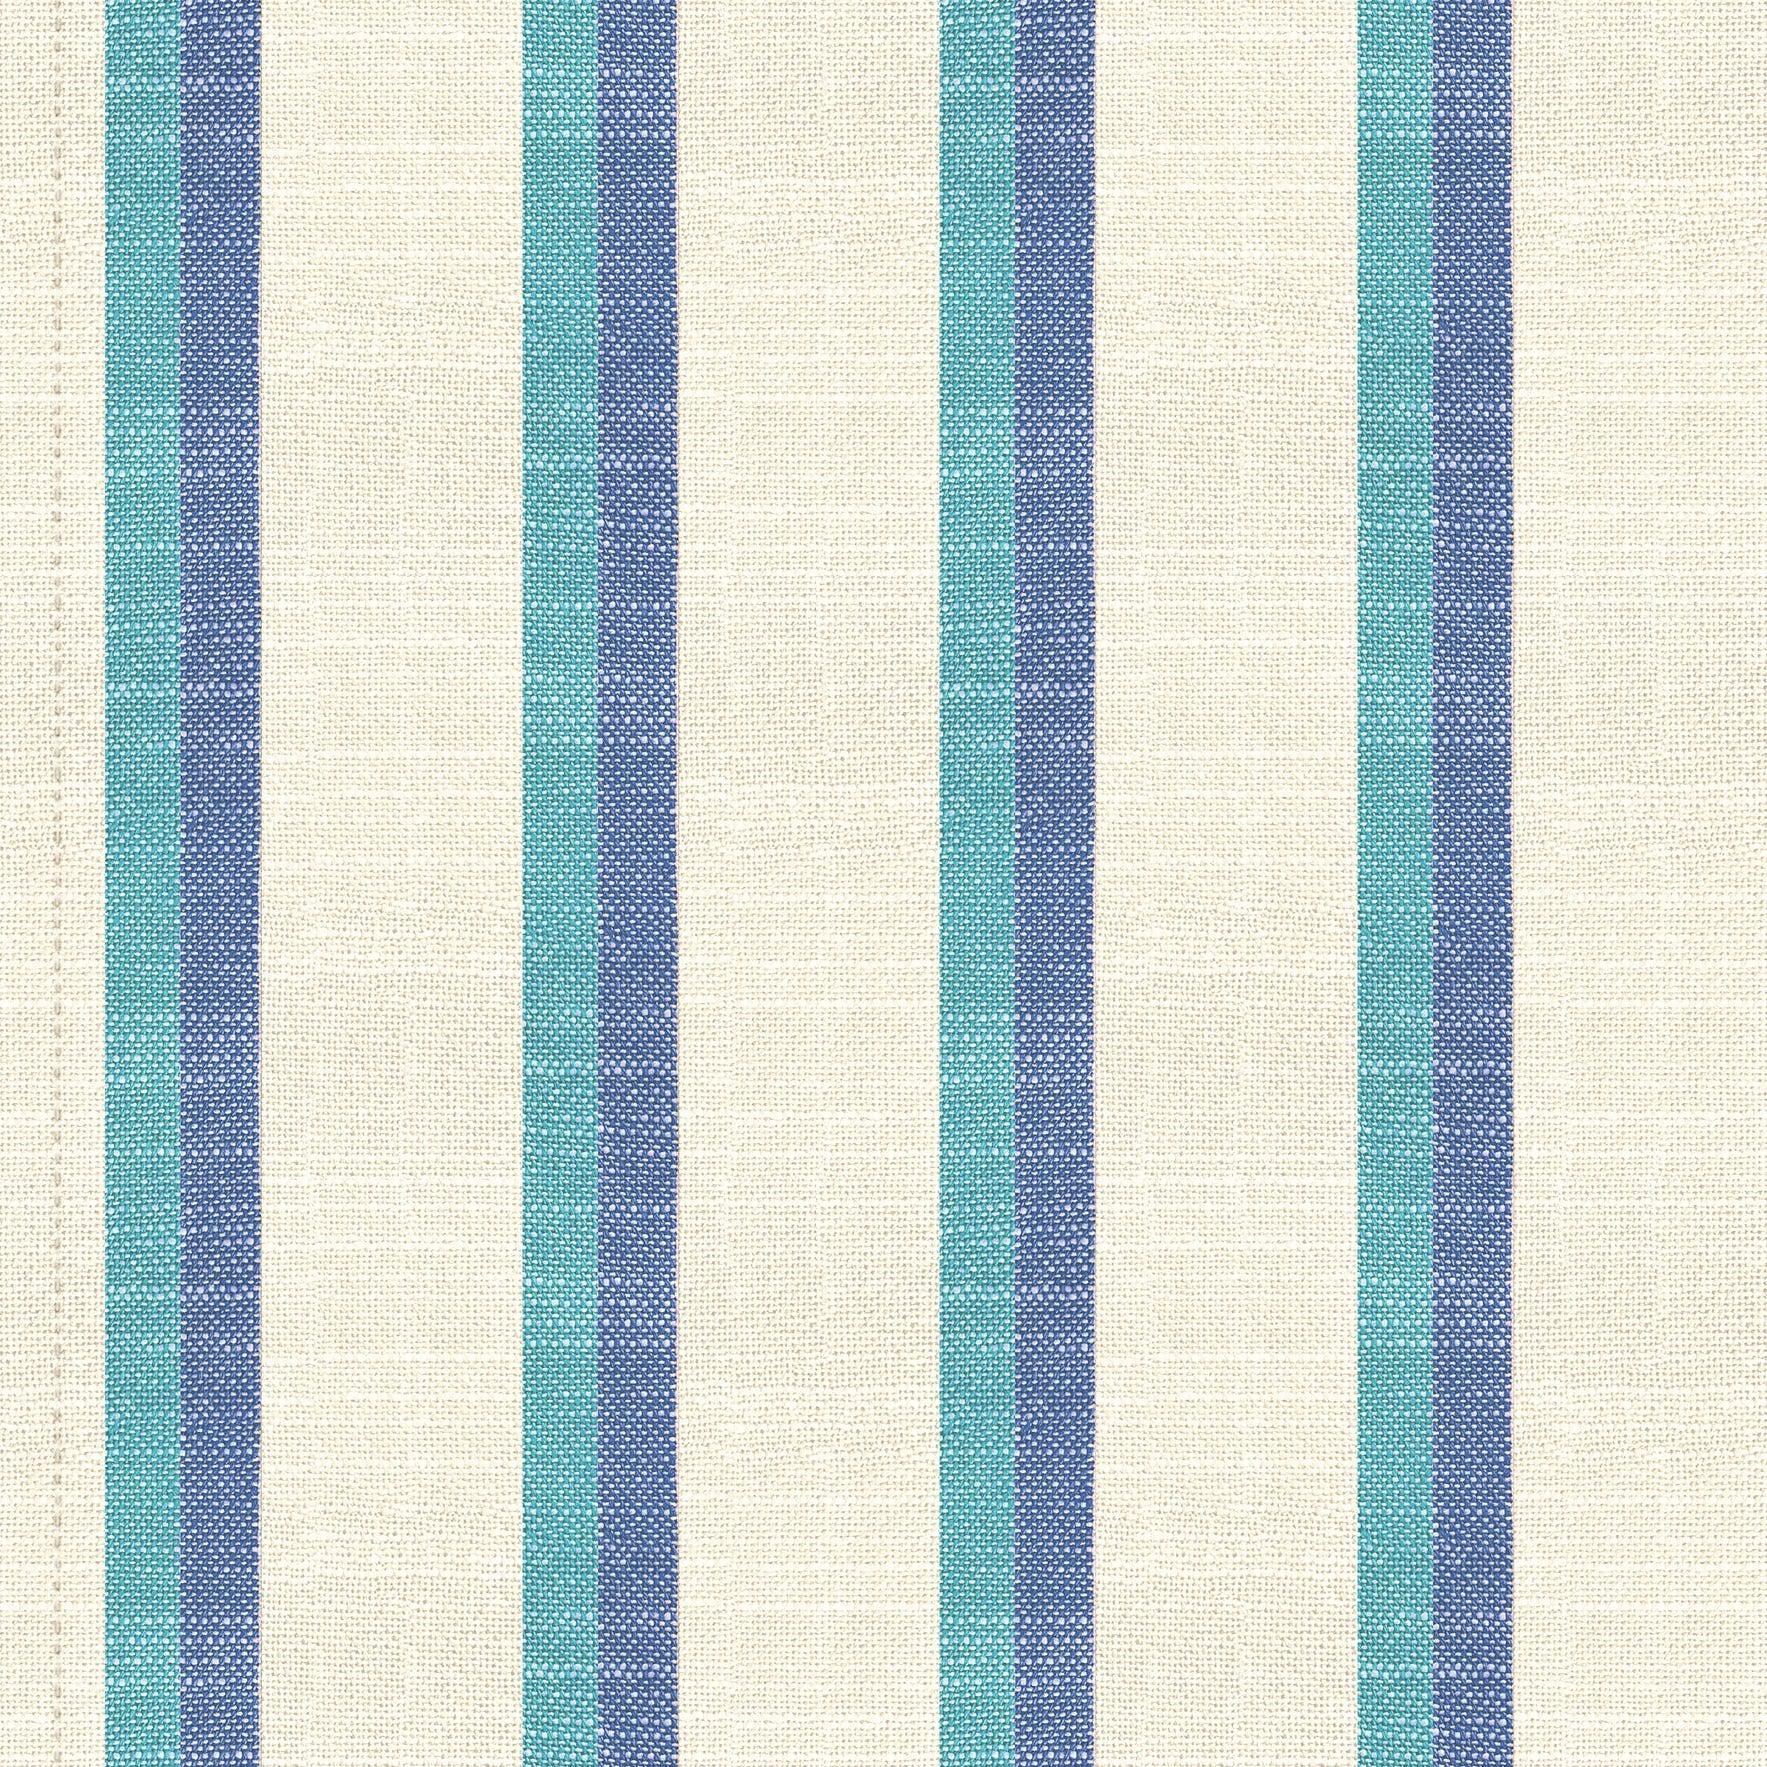 Ruby Star Society-Apron Stripe Toweling Blue-fabric-gather here online